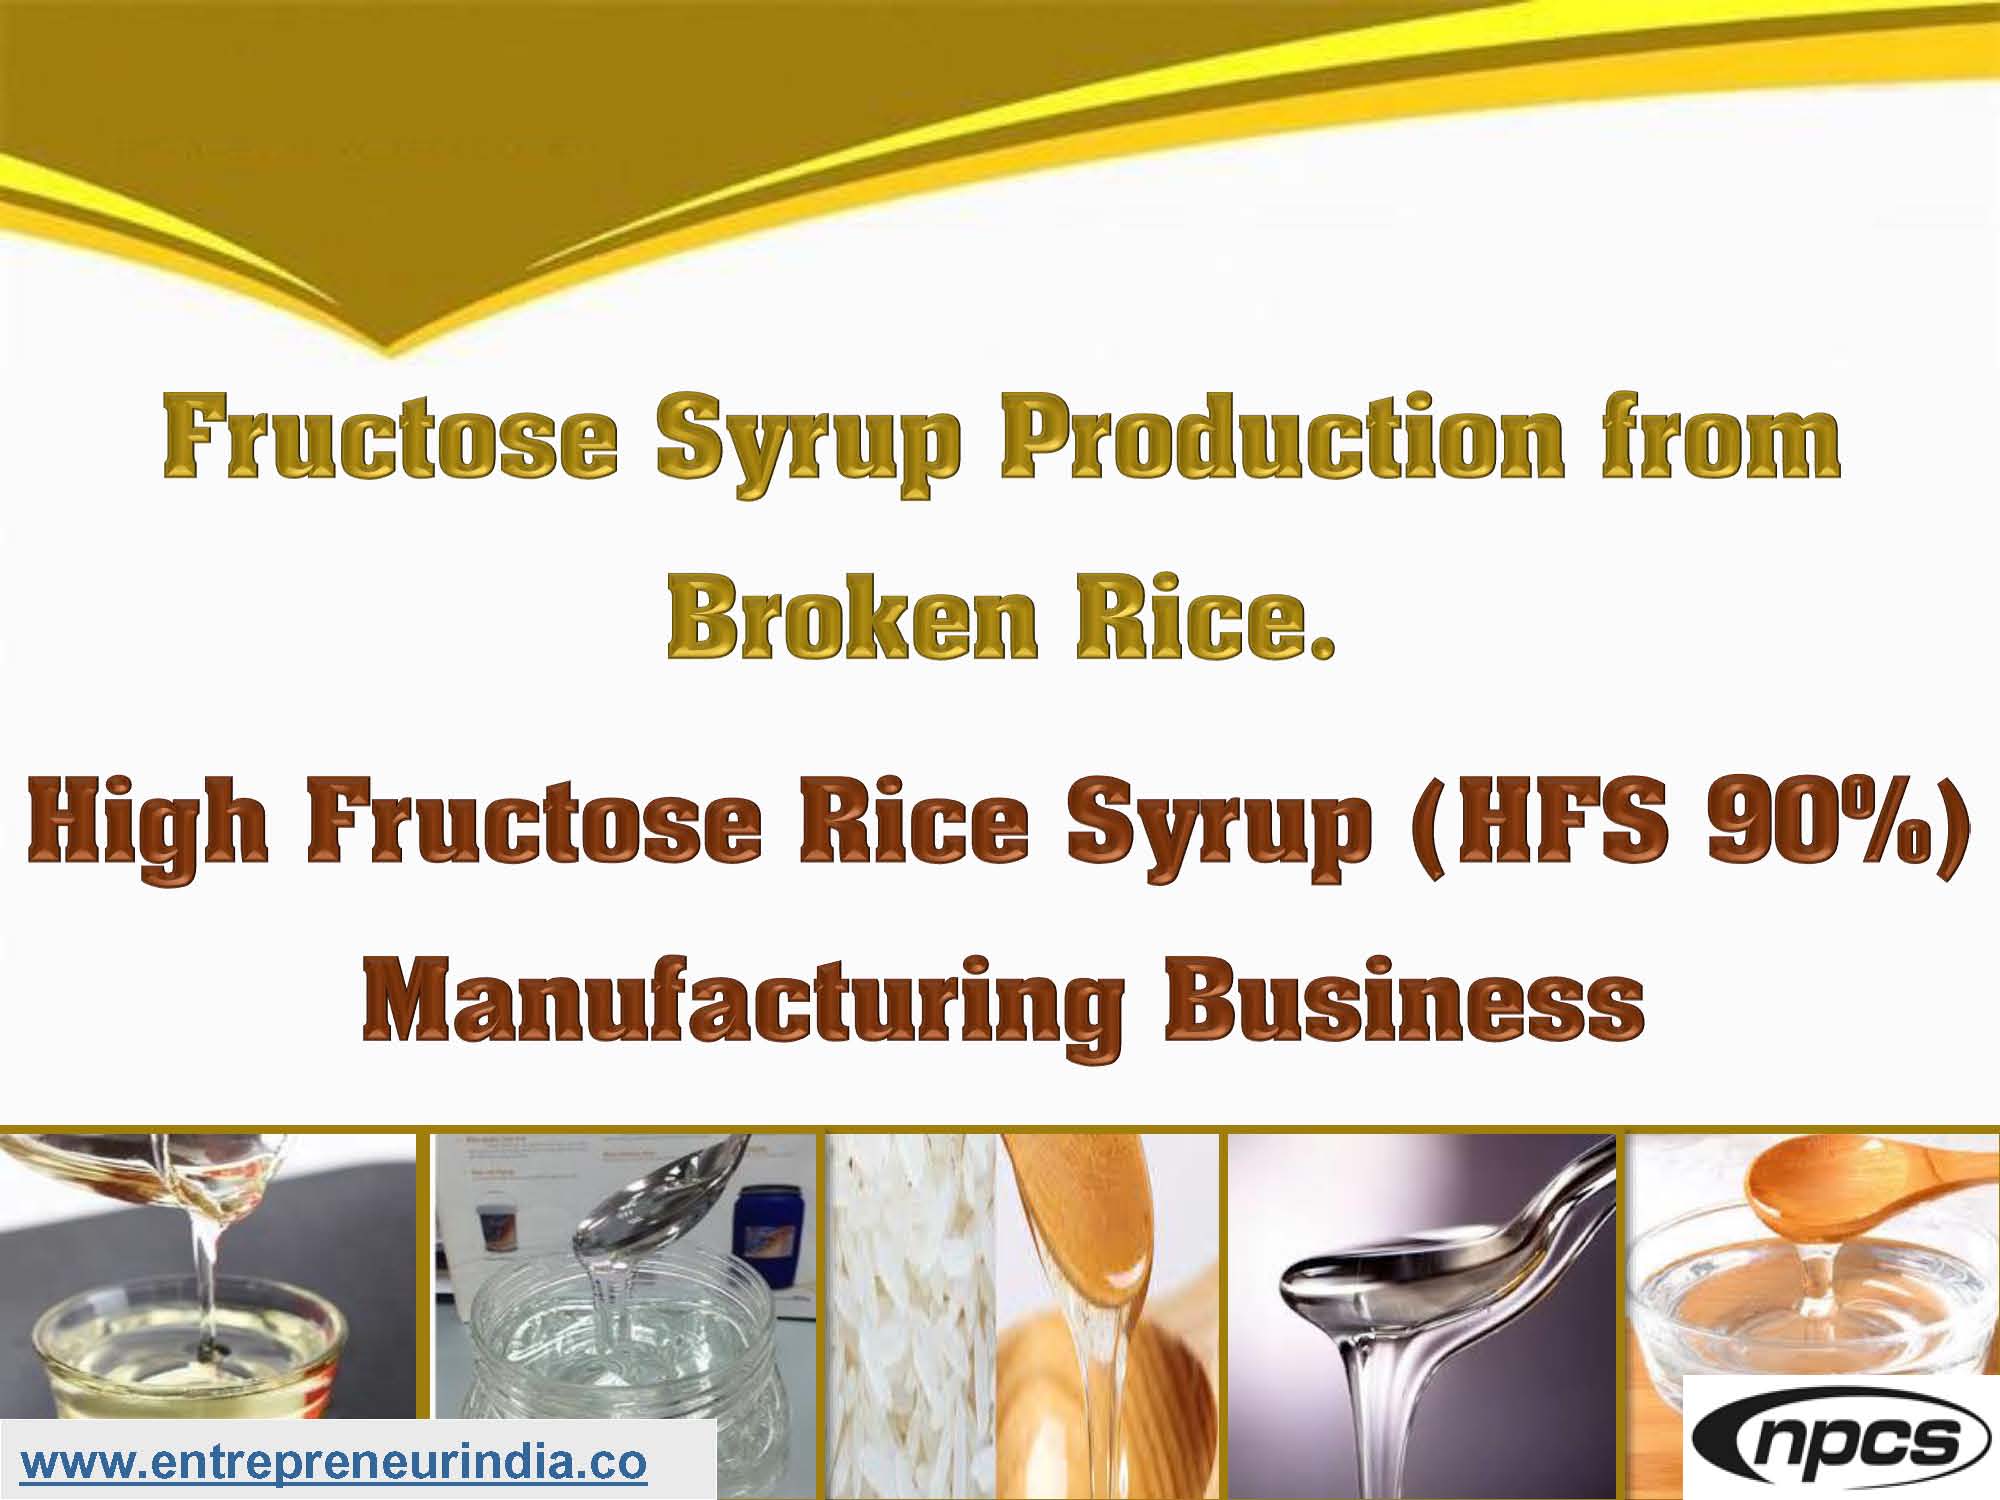 Fructose Syrup Production from Broken Rice